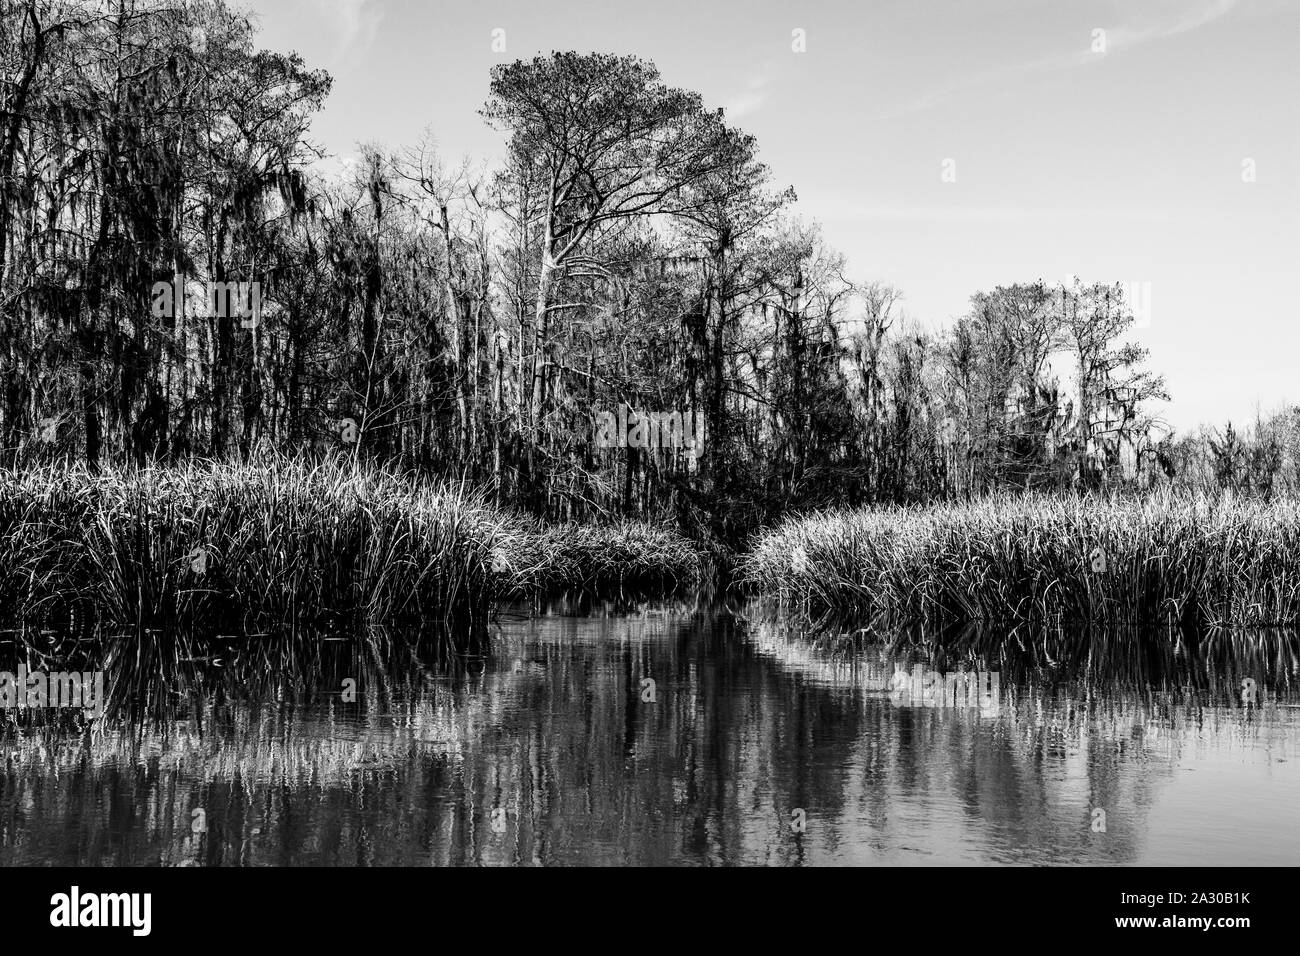 Louisiana Bayou: Reed plants (Phragmites australis) and cypress trees in the swamp wetlands near New Orleans in black and white Stock Photo